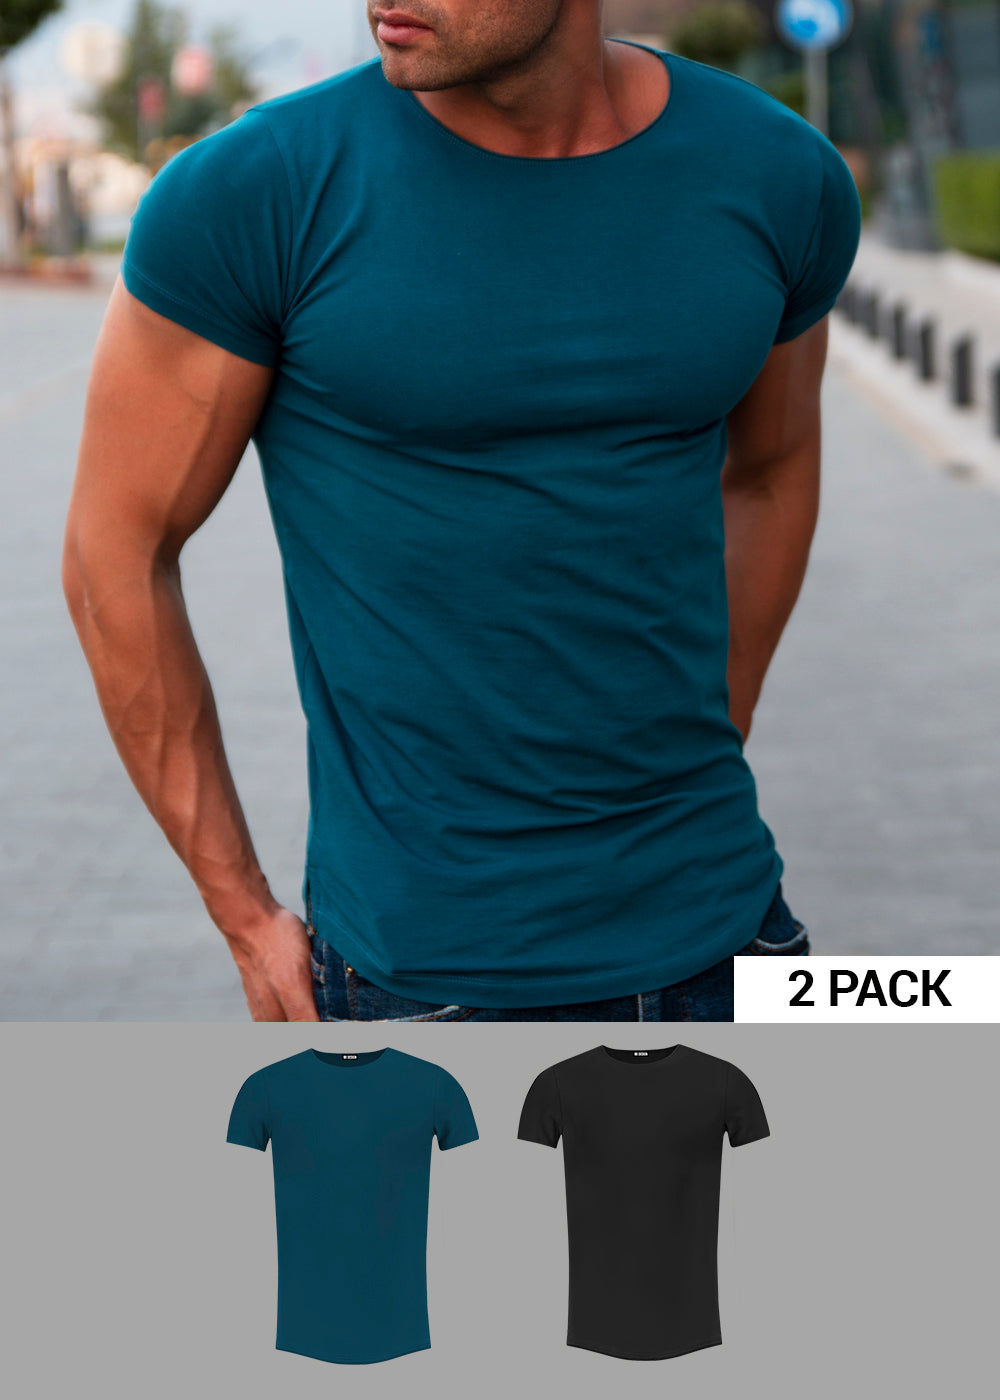 2 Pack Plain Ocean Blue and Black T-shirts - Round Neck Longline – RB ...